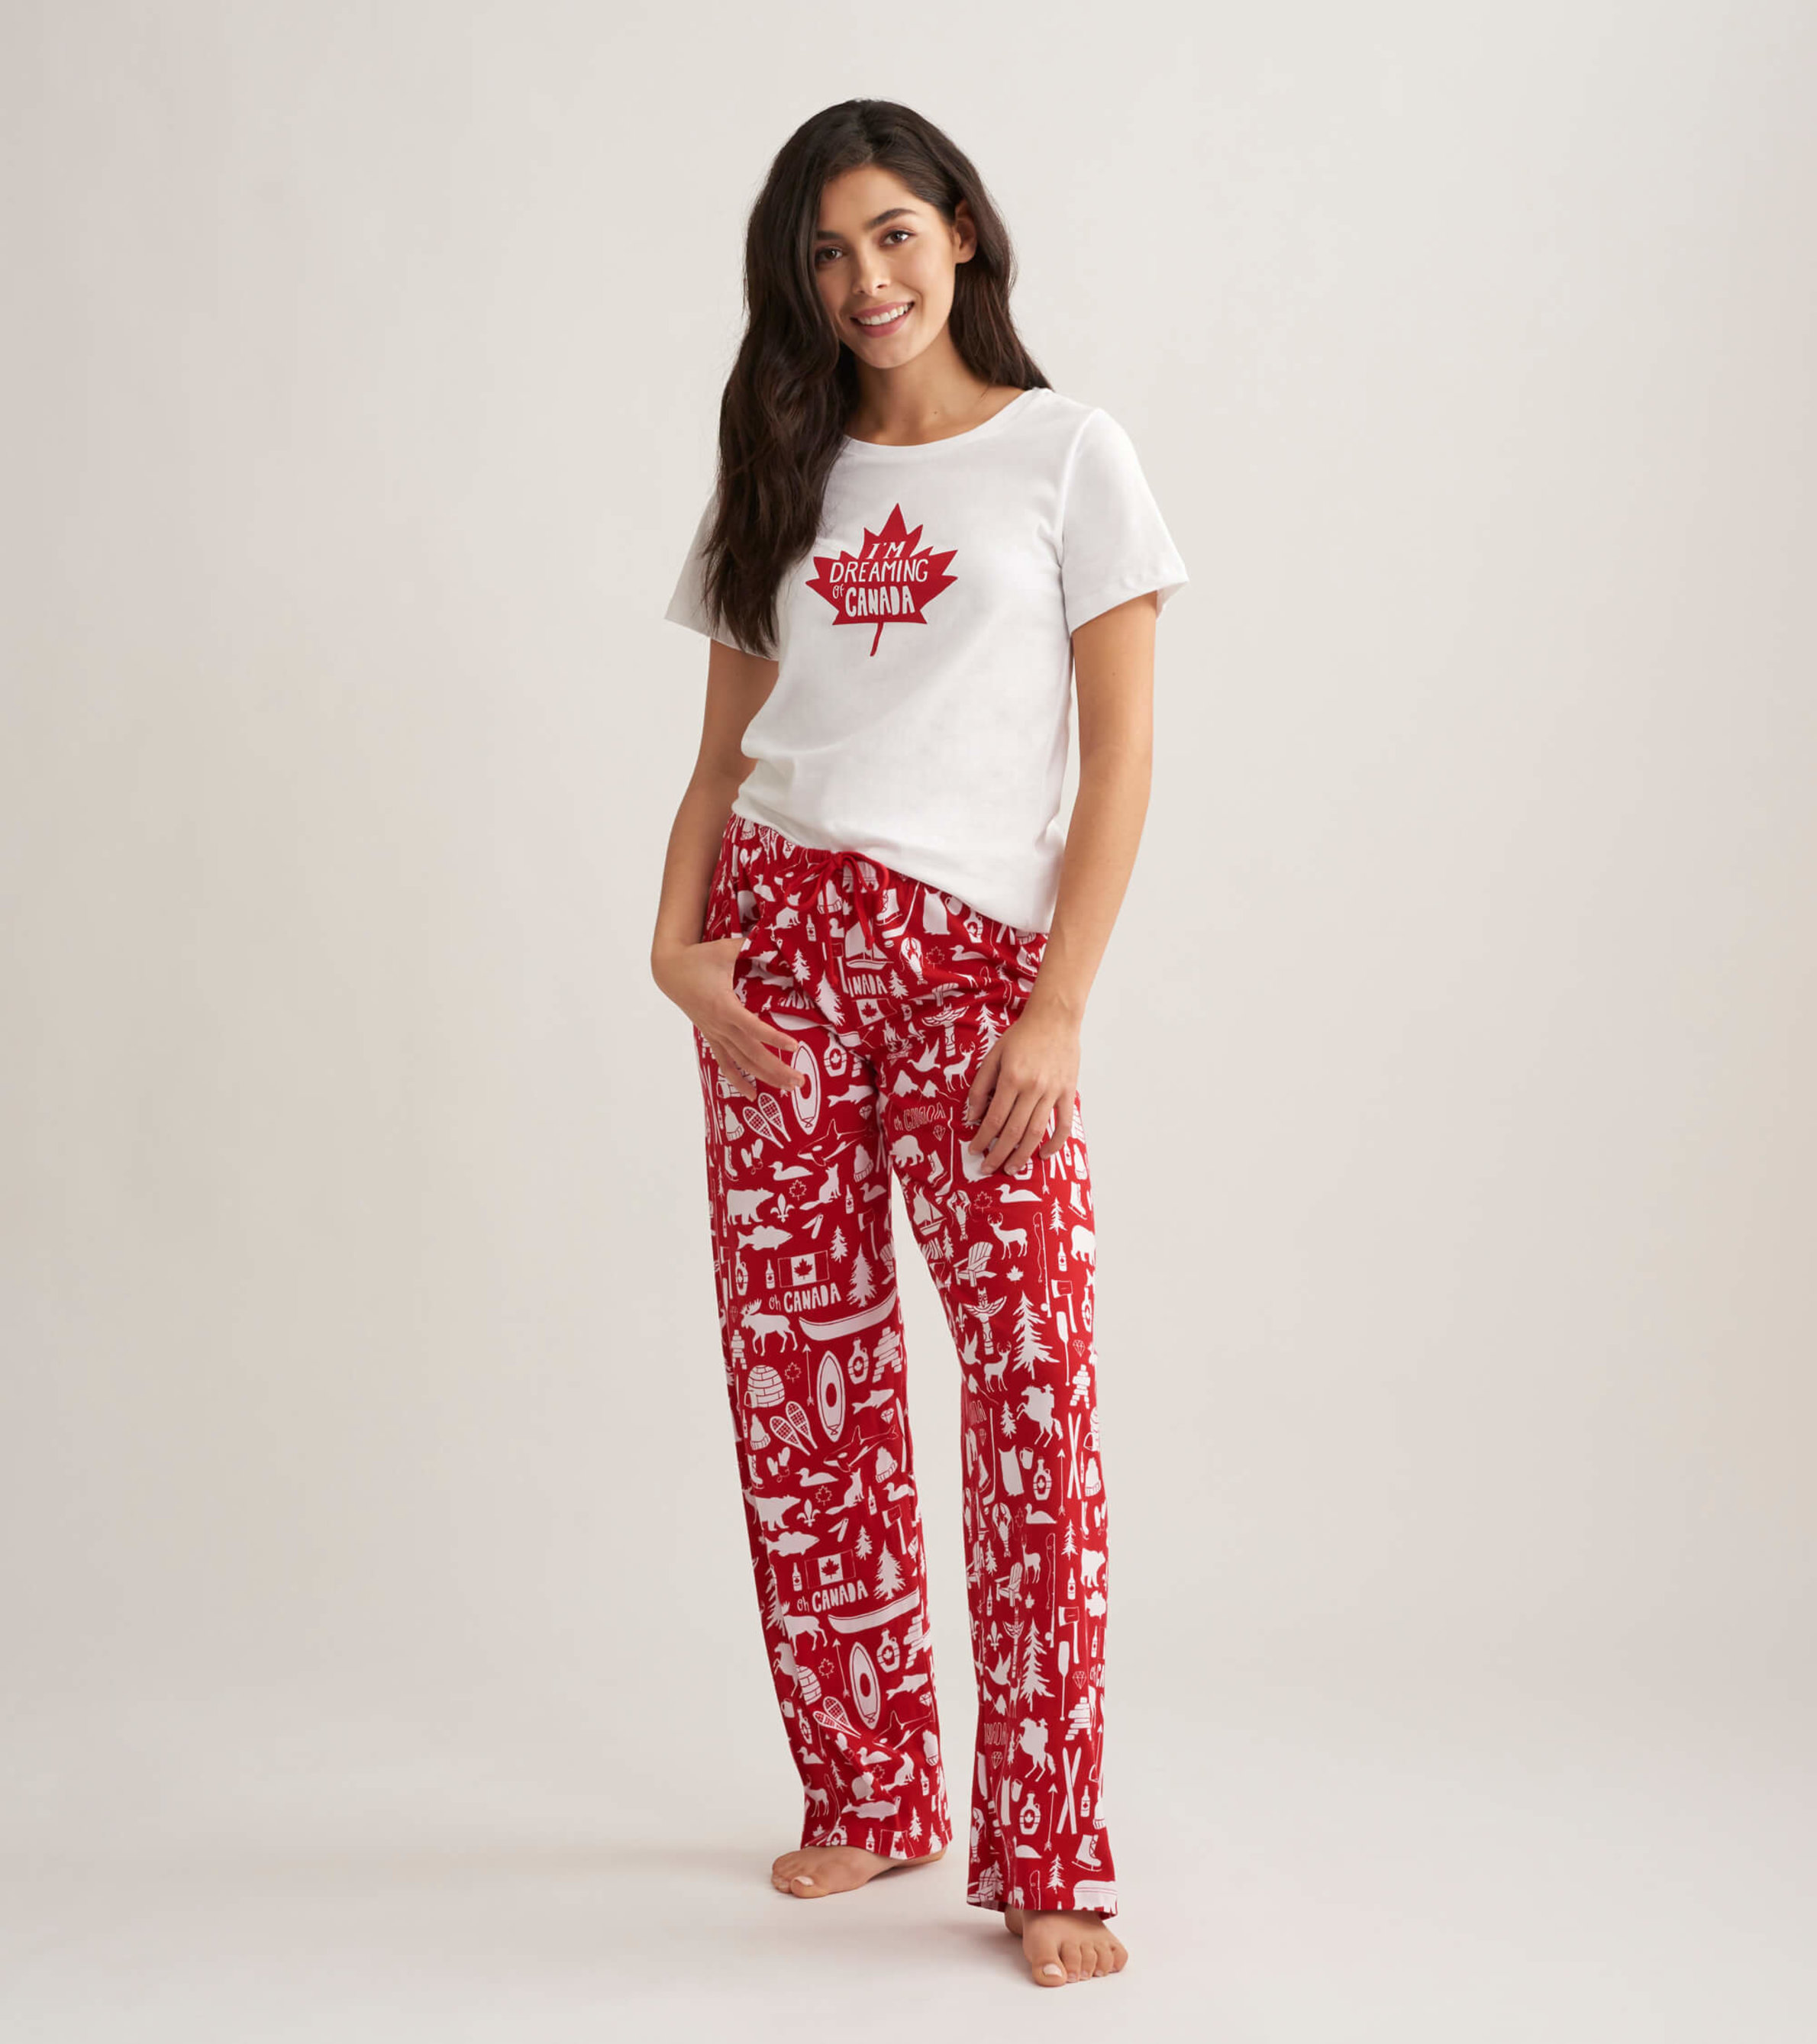 https://cdn.littlebluehouse.com/product_images/oh-canada-womens-jersey-pajama-pants/PA2OCAN001_A_jpg/pdp_zoom.jpg?c=1603916174&locale=en